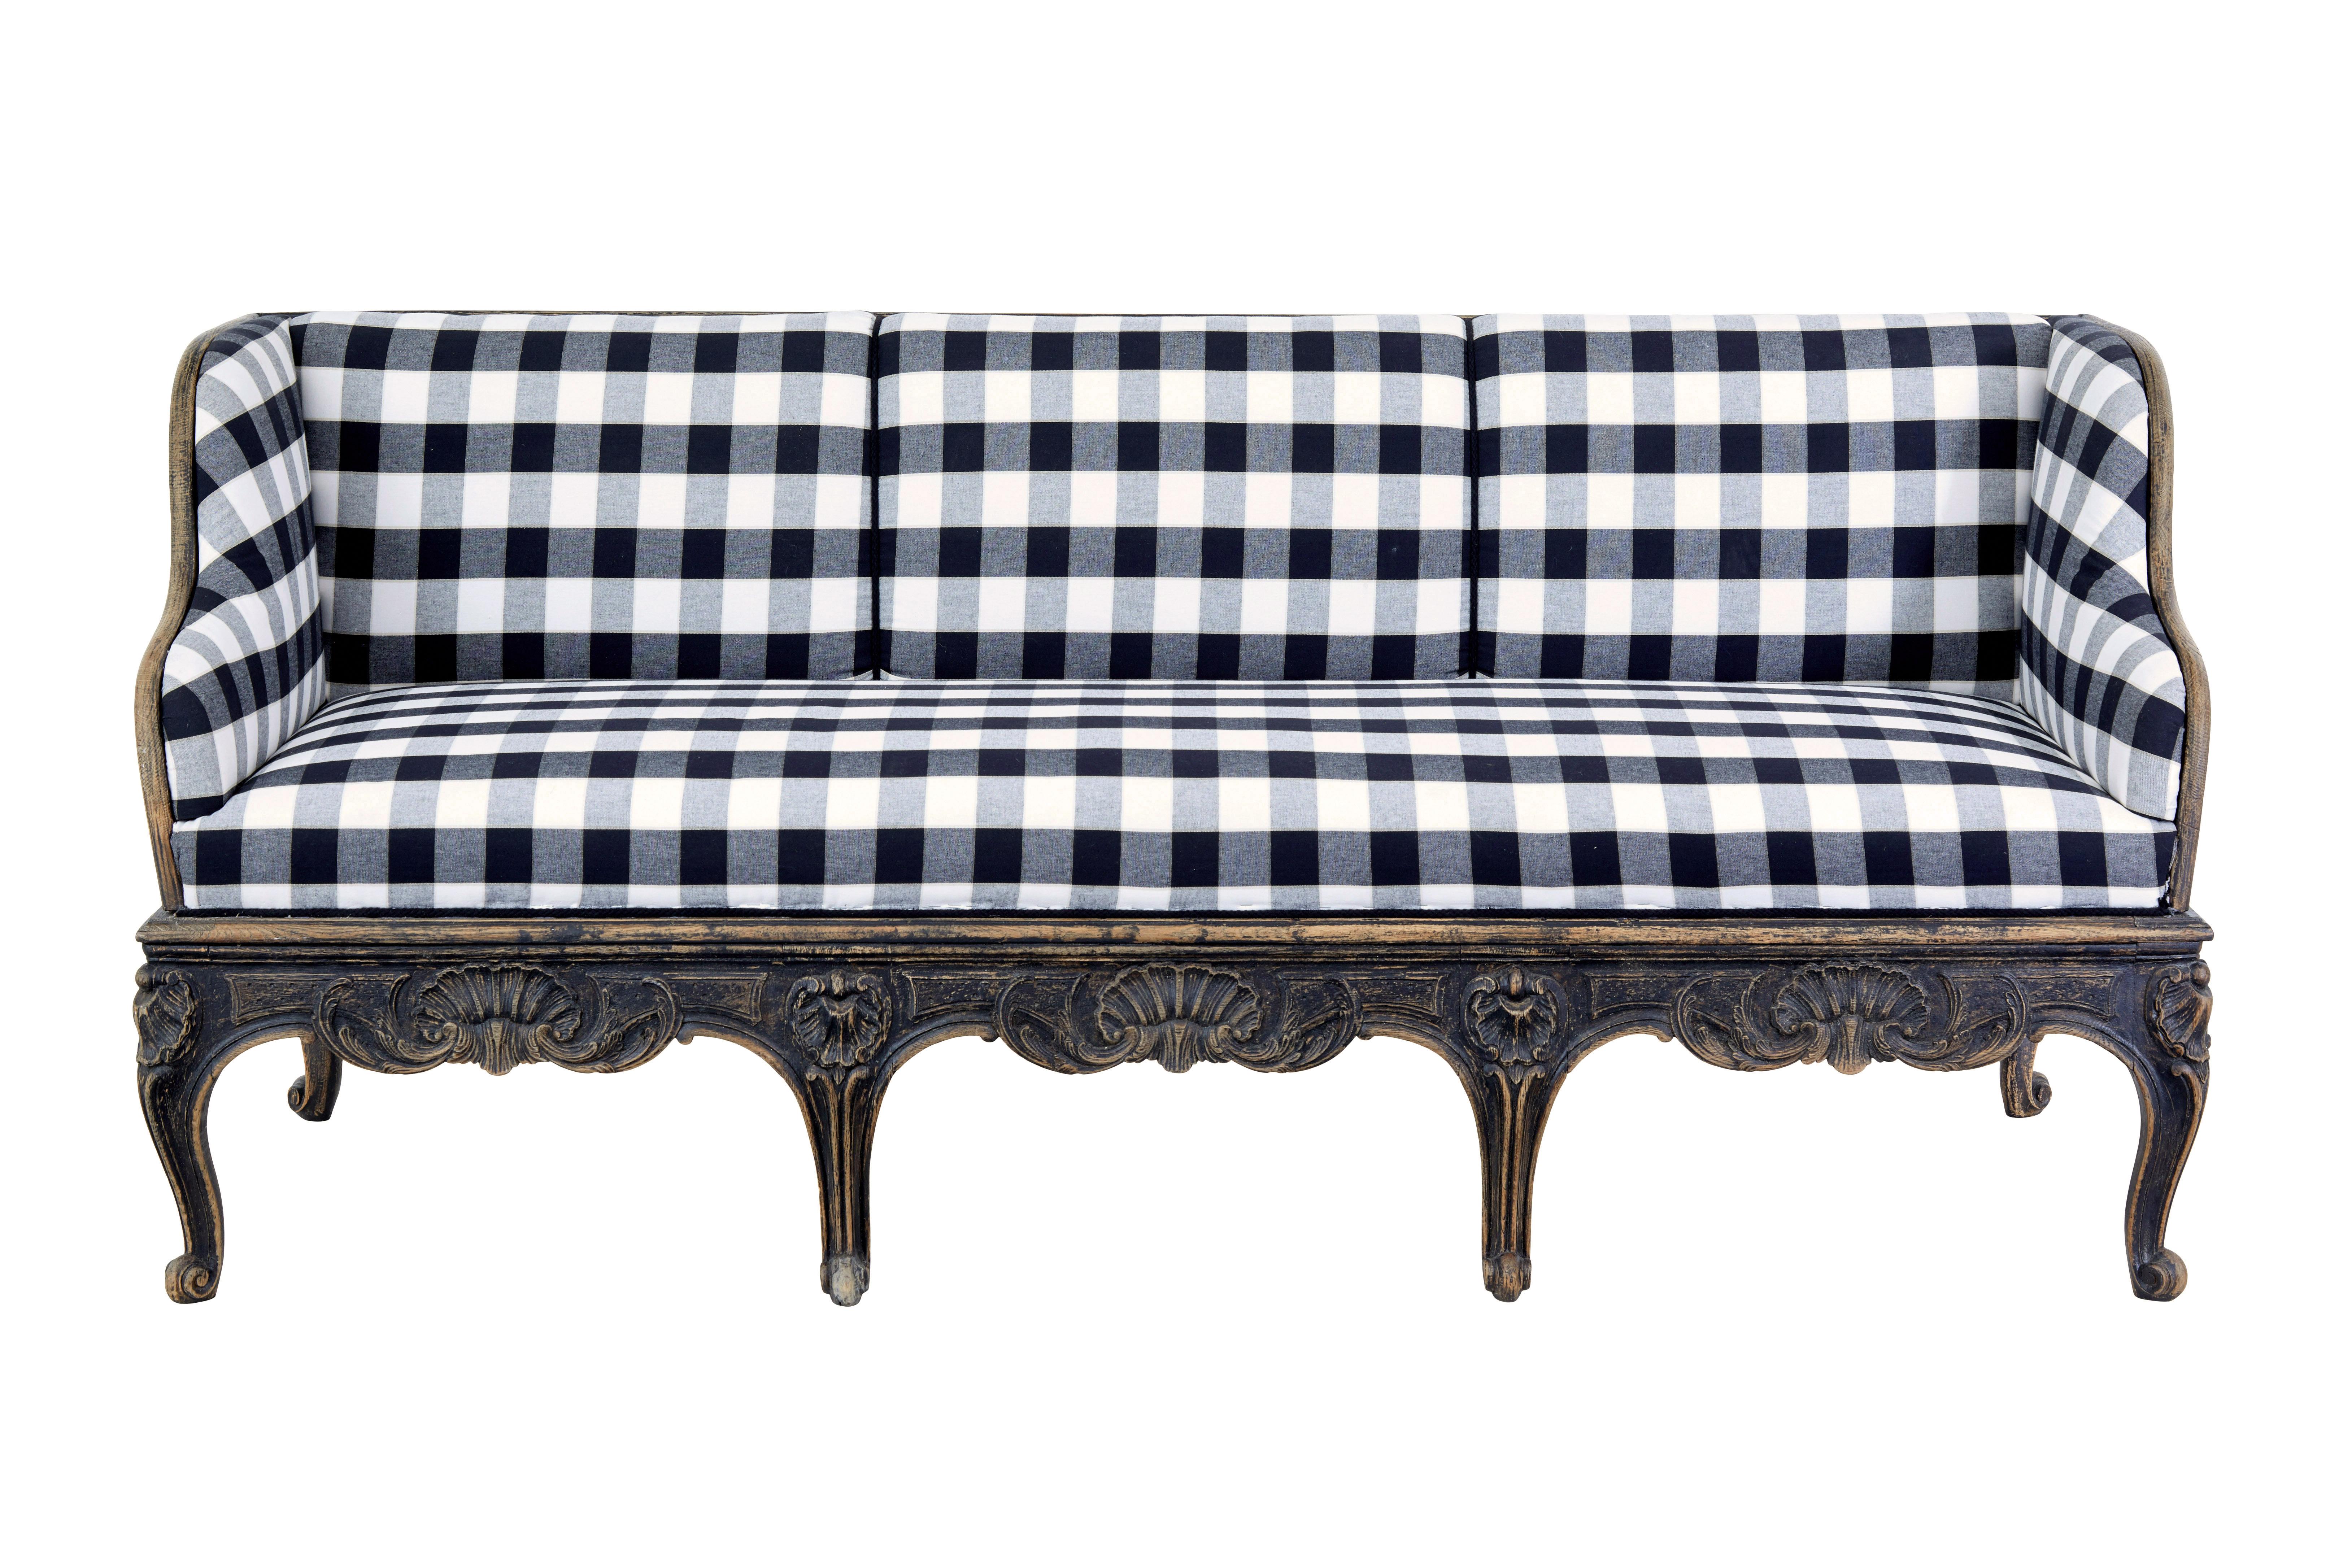 Early 19th century carved oak Swedish painted sofa, circa 1820.

Rare and stunning piece of period Swedish furniture.  3 seat sofa which has recently been re-covered in black/grey and white check fabric.

Shaped sides with diamond shape pattern